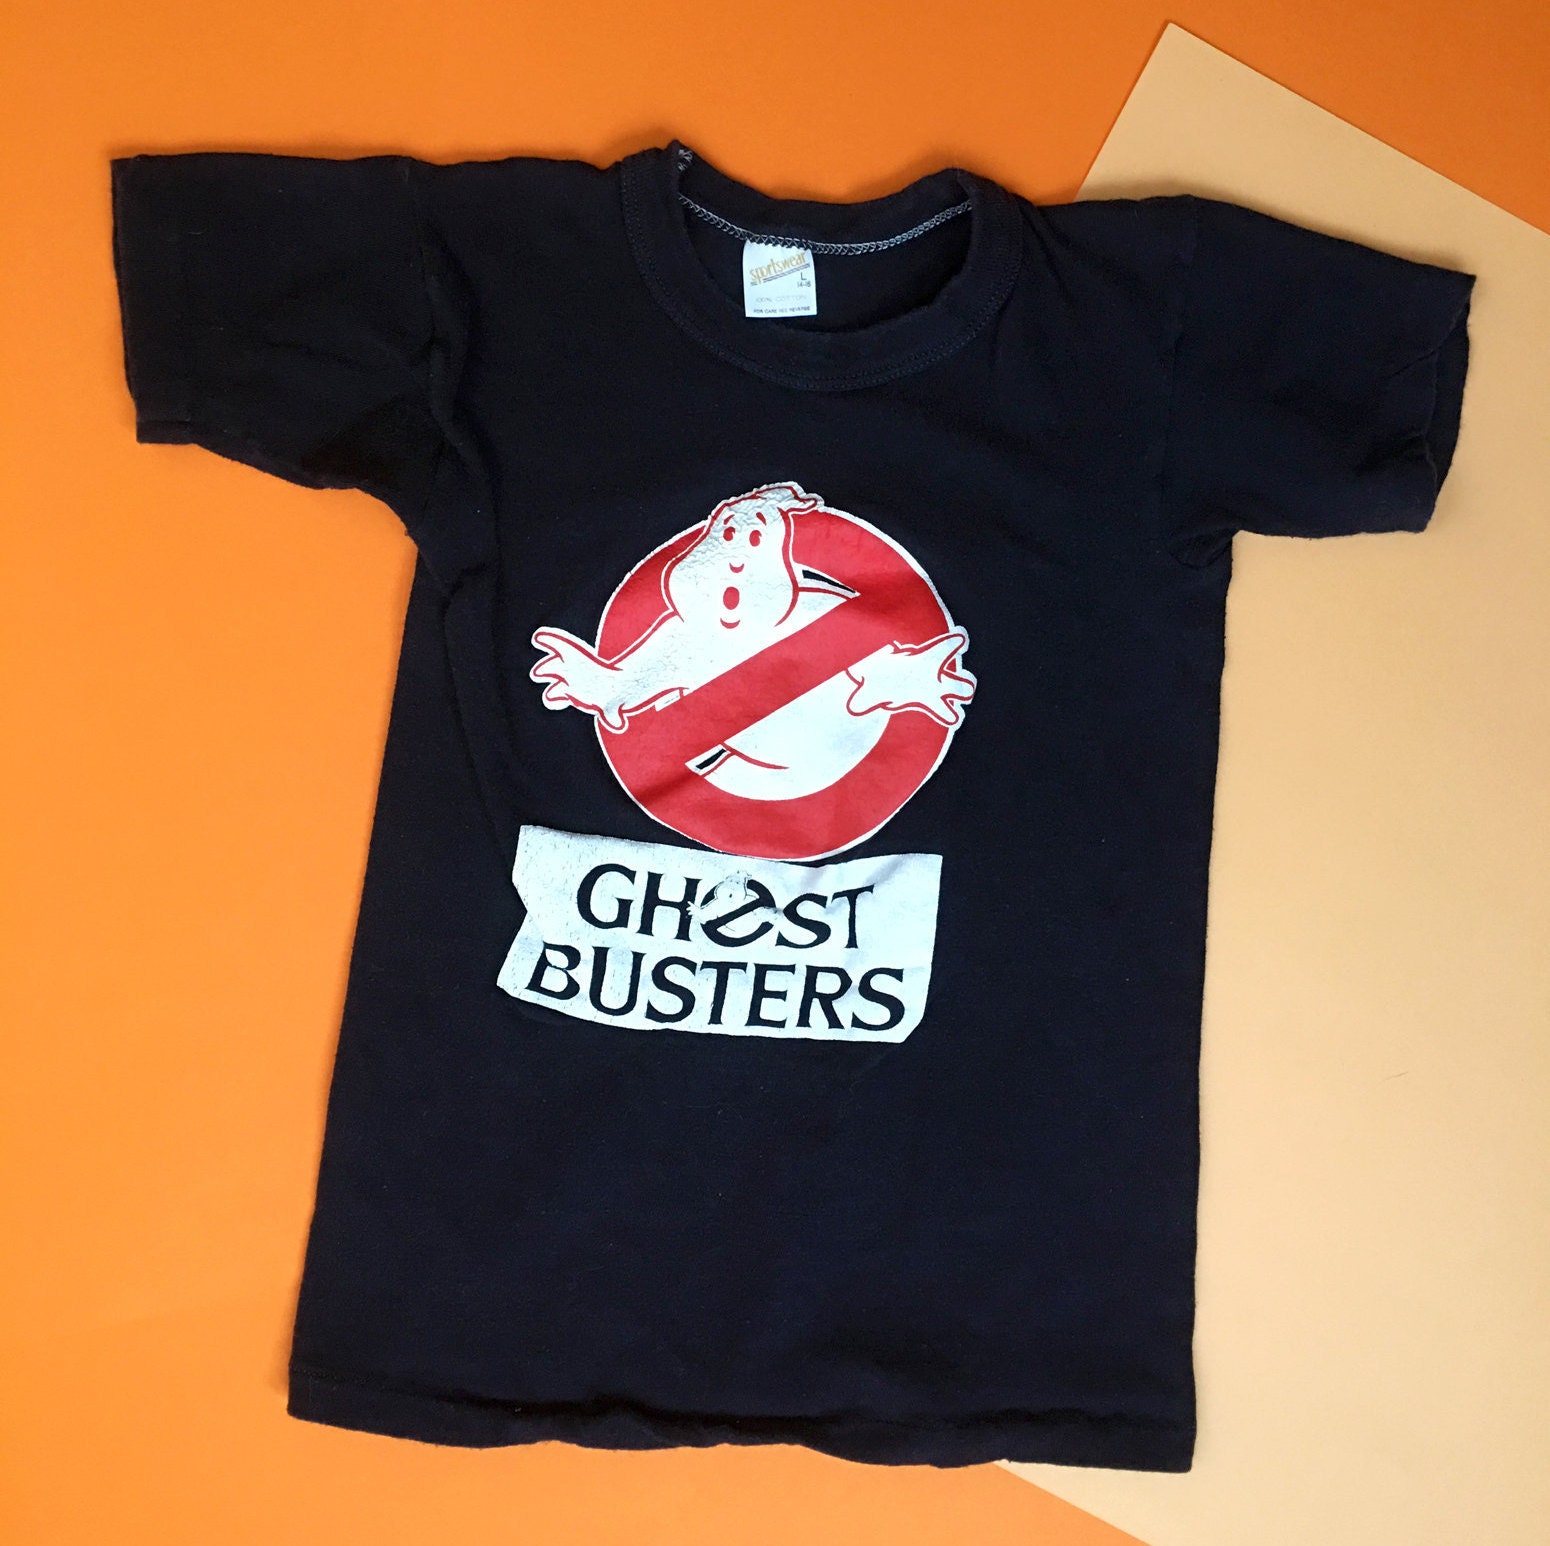 Ghostbusters T Shirt Classic Retro Movie Funny Gift Kids Unisex Children Tee Top 